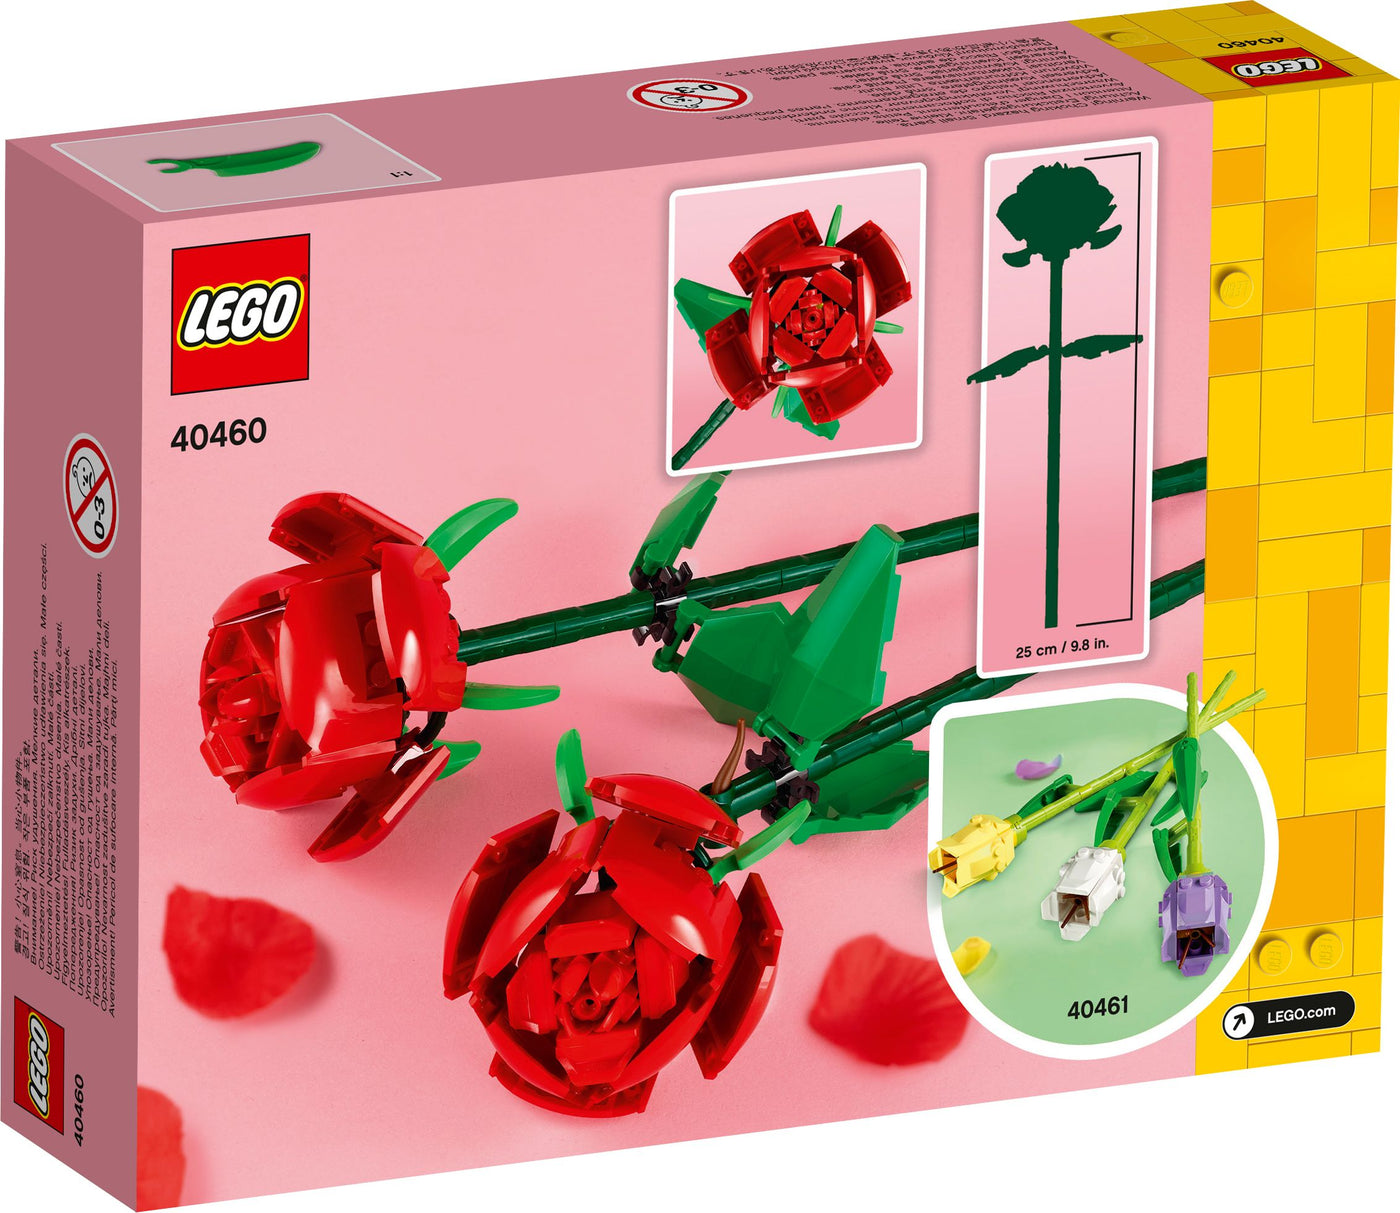 A Comparison of the LEGO® Flower Bouquet, Tulips, and Roses